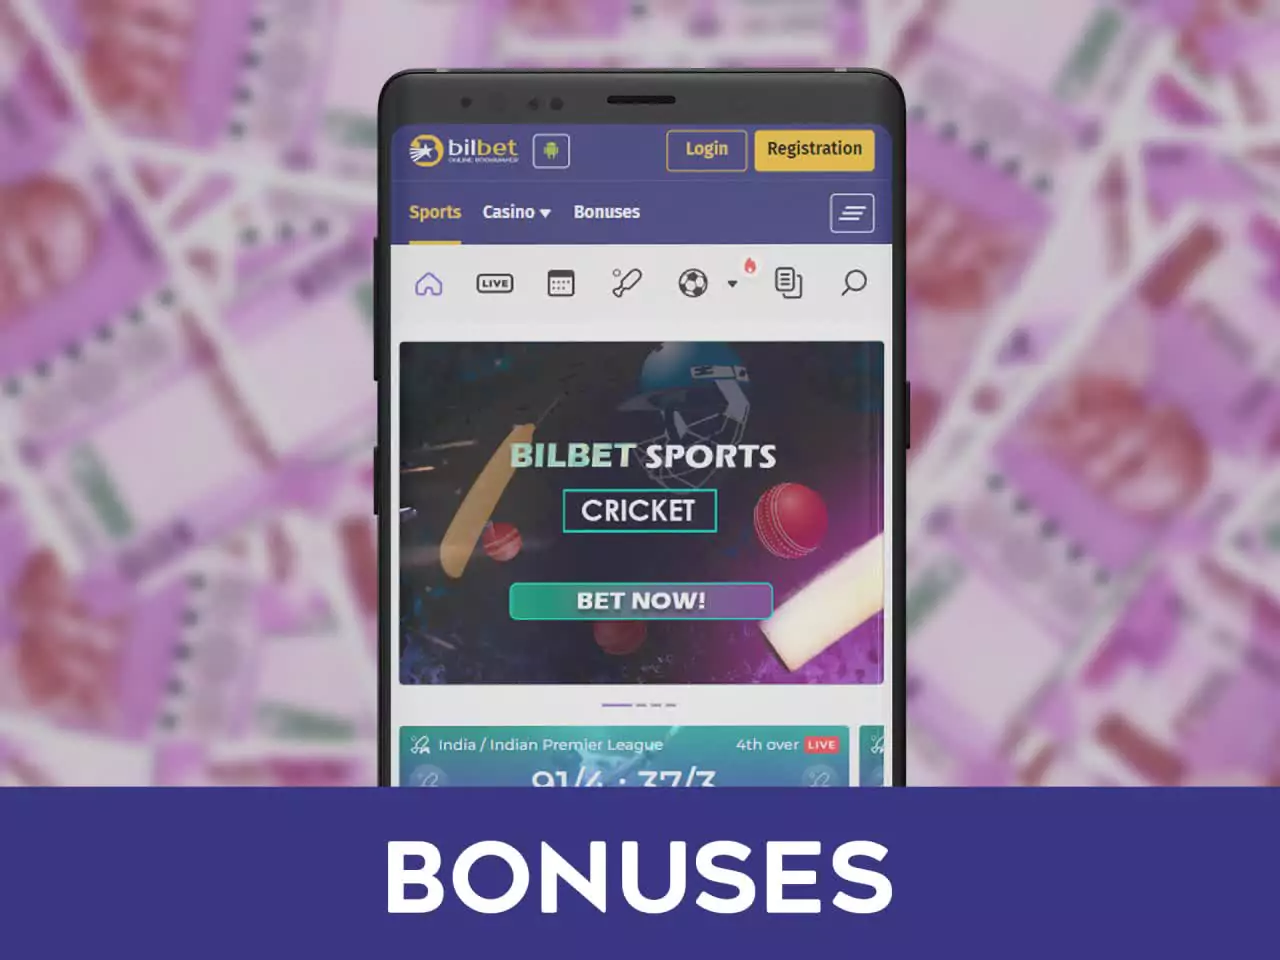 You can get different bonuses and participate in promo in your app.